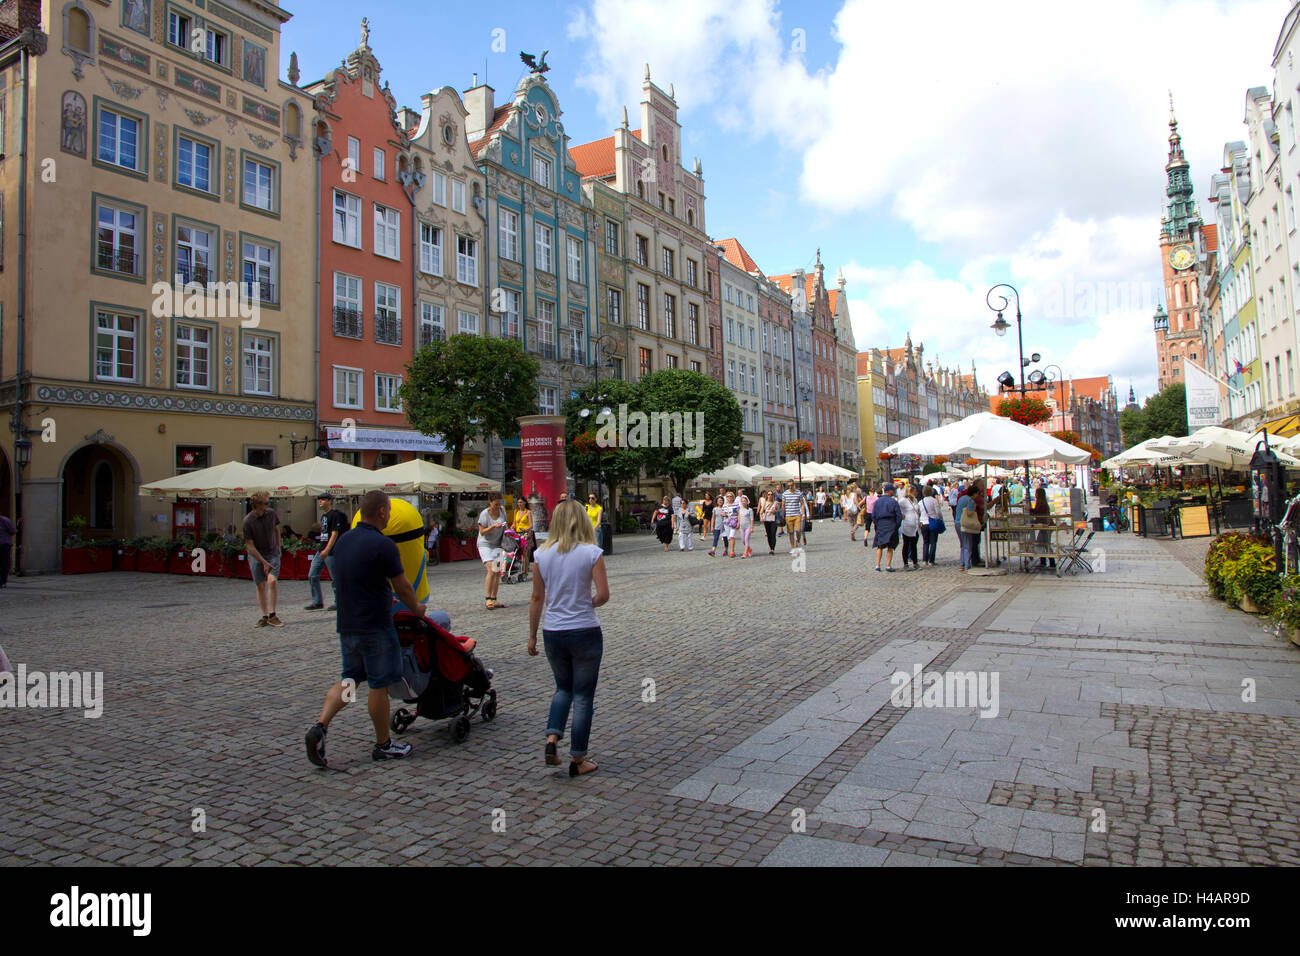 Magnificent buildings of mixed Gothic, Baroque and Renaissaince style, many dating to the Middle Ages, line Dluga Street, Gdansk Stock Photo